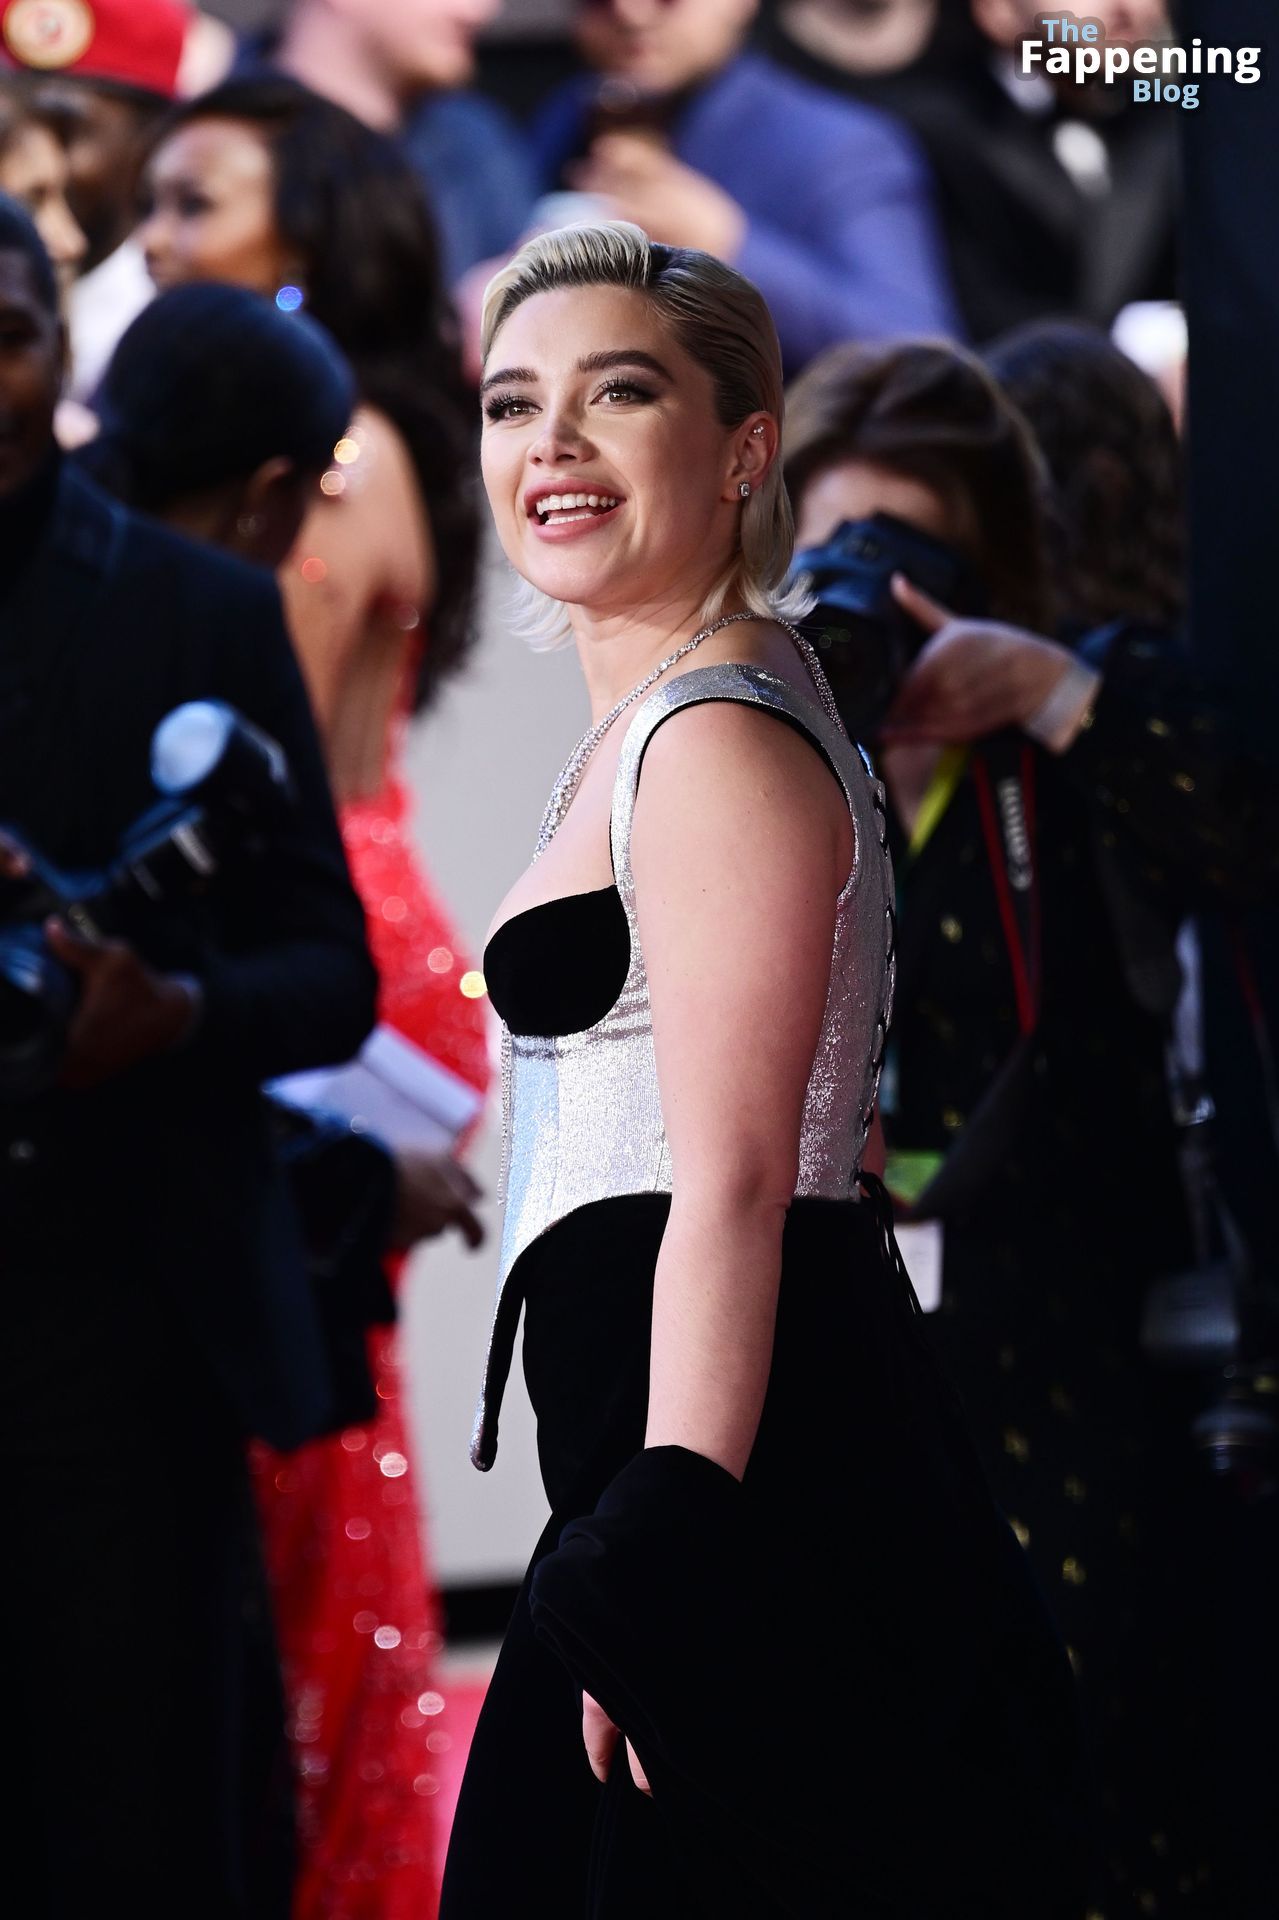 Florence-Pugh-Sexy-51-The-Fappening-Blog-1.jpg